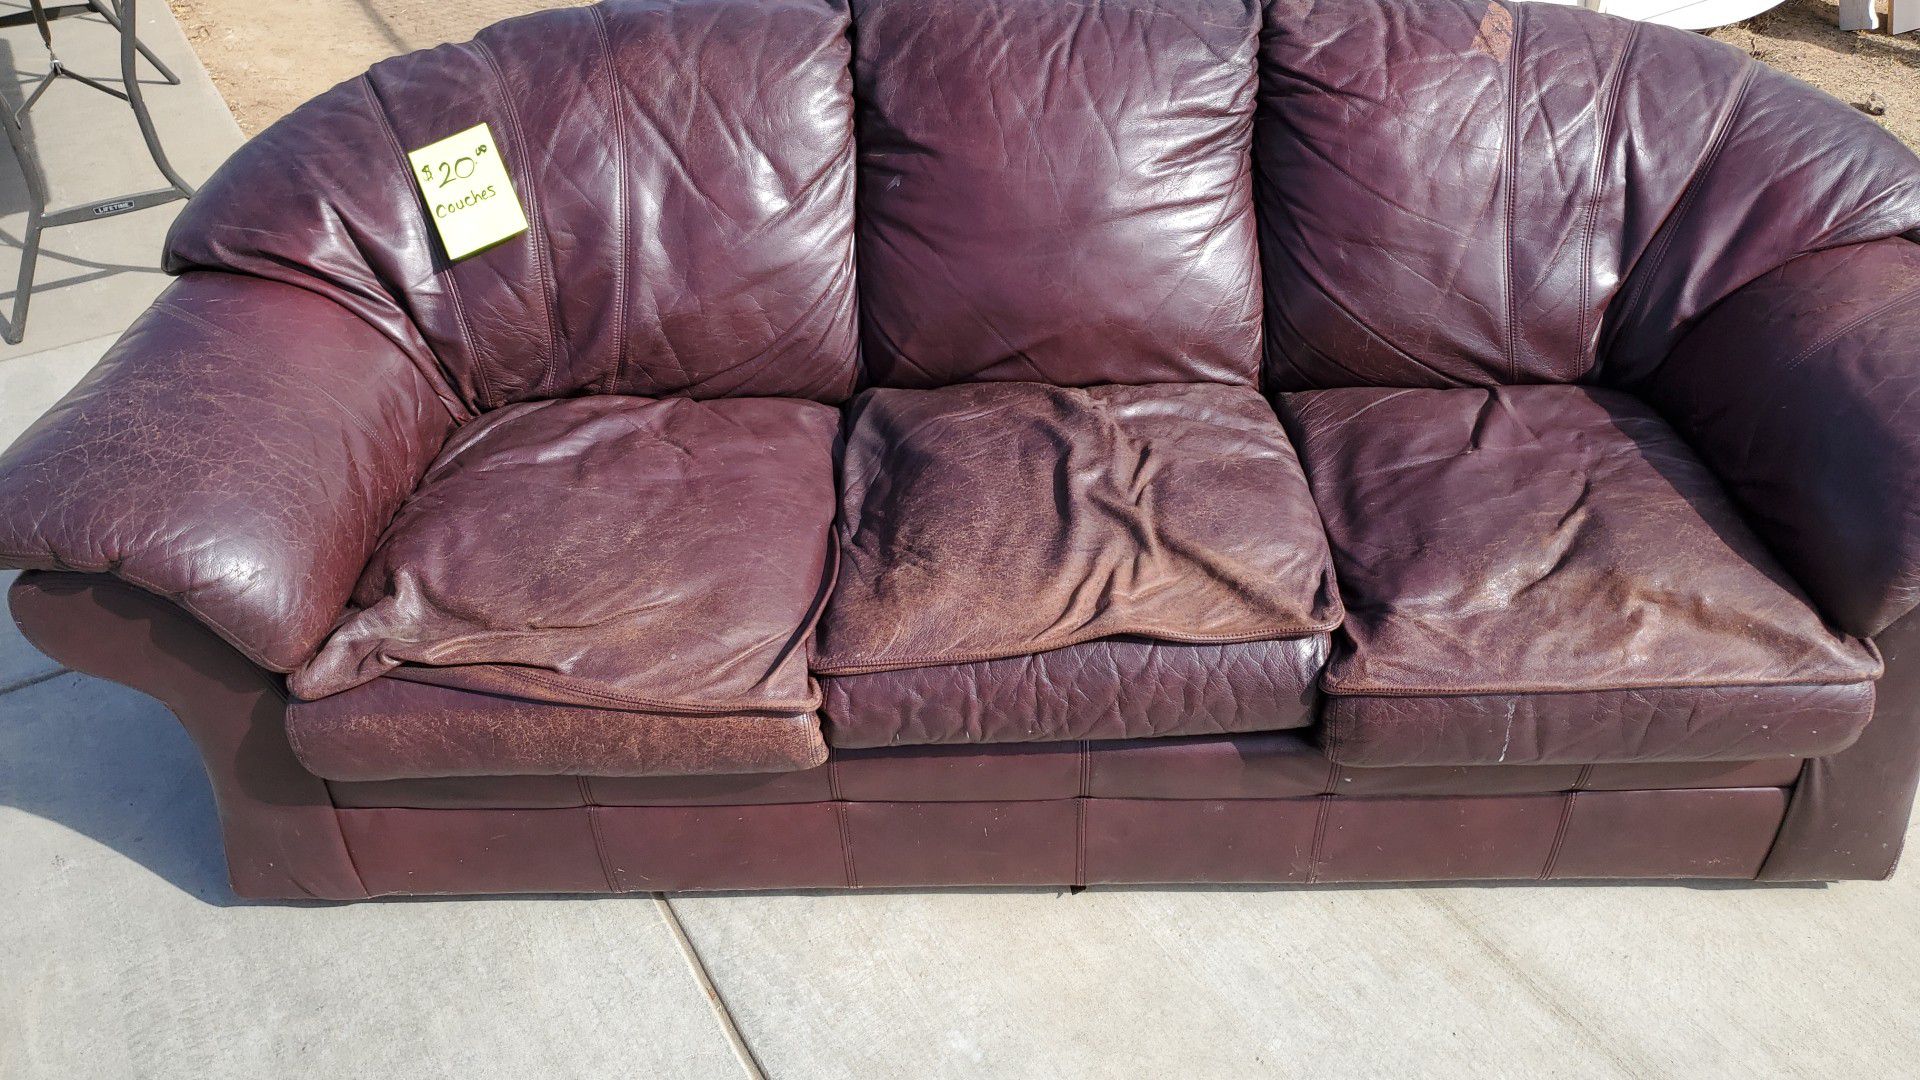 Couches leather FREE